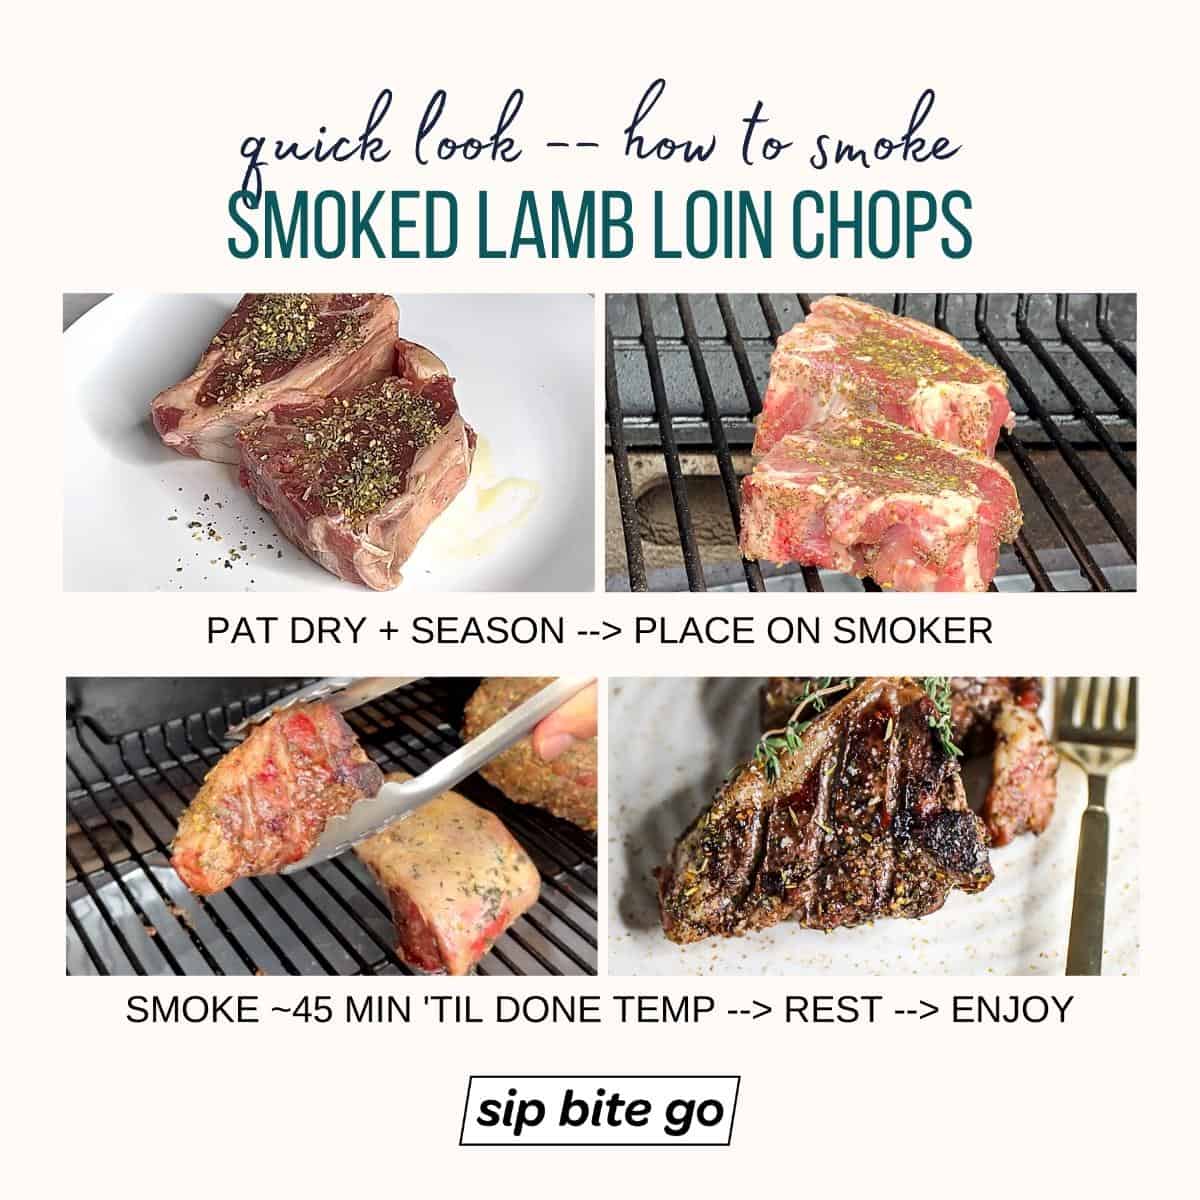 Infographic with steps to make Traeger smoked lamb loin chops recipe